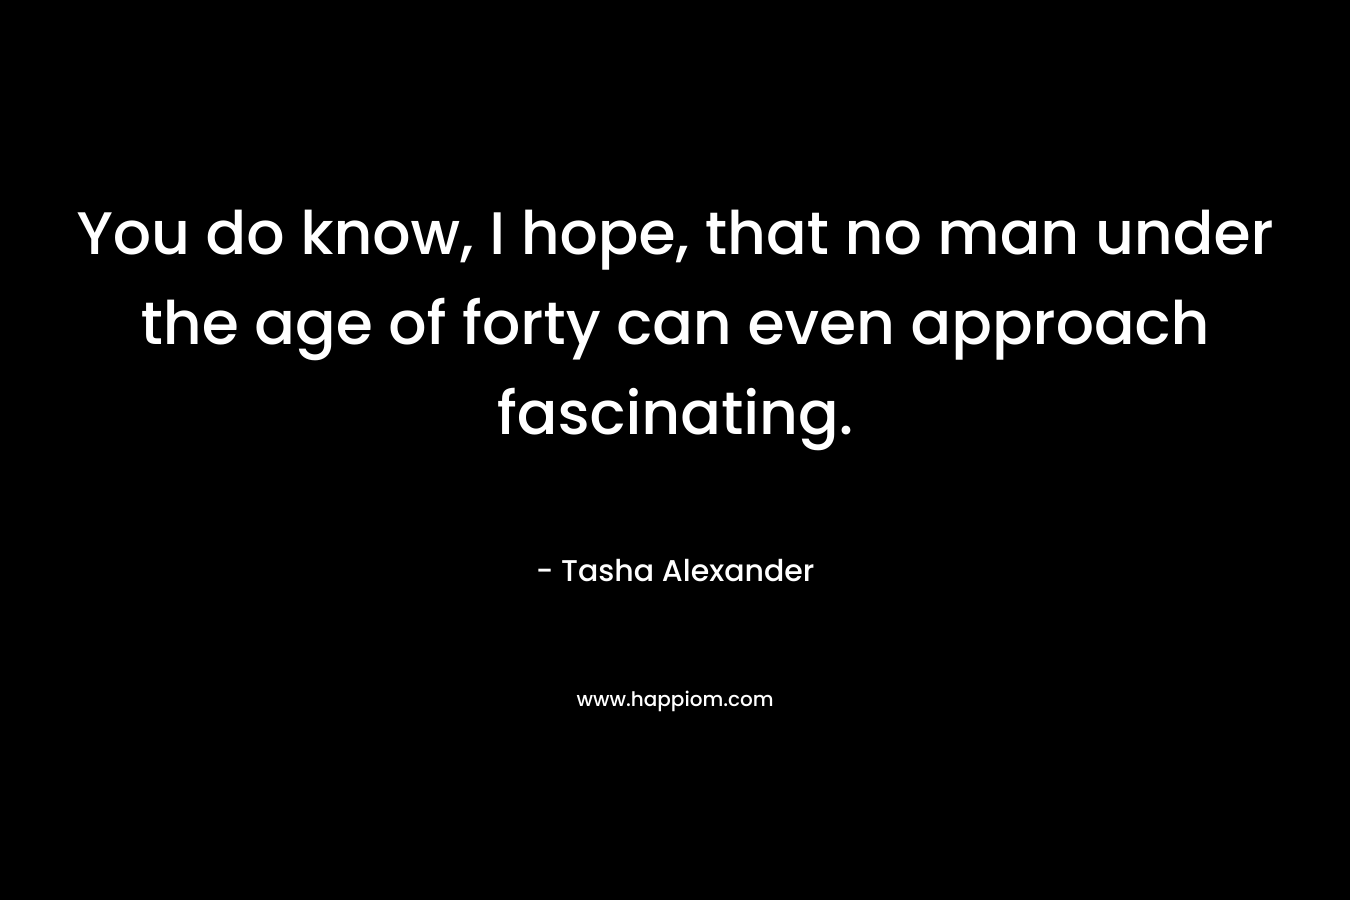 You do know, I hope, that no man under the age of forty can even approach fascinating.